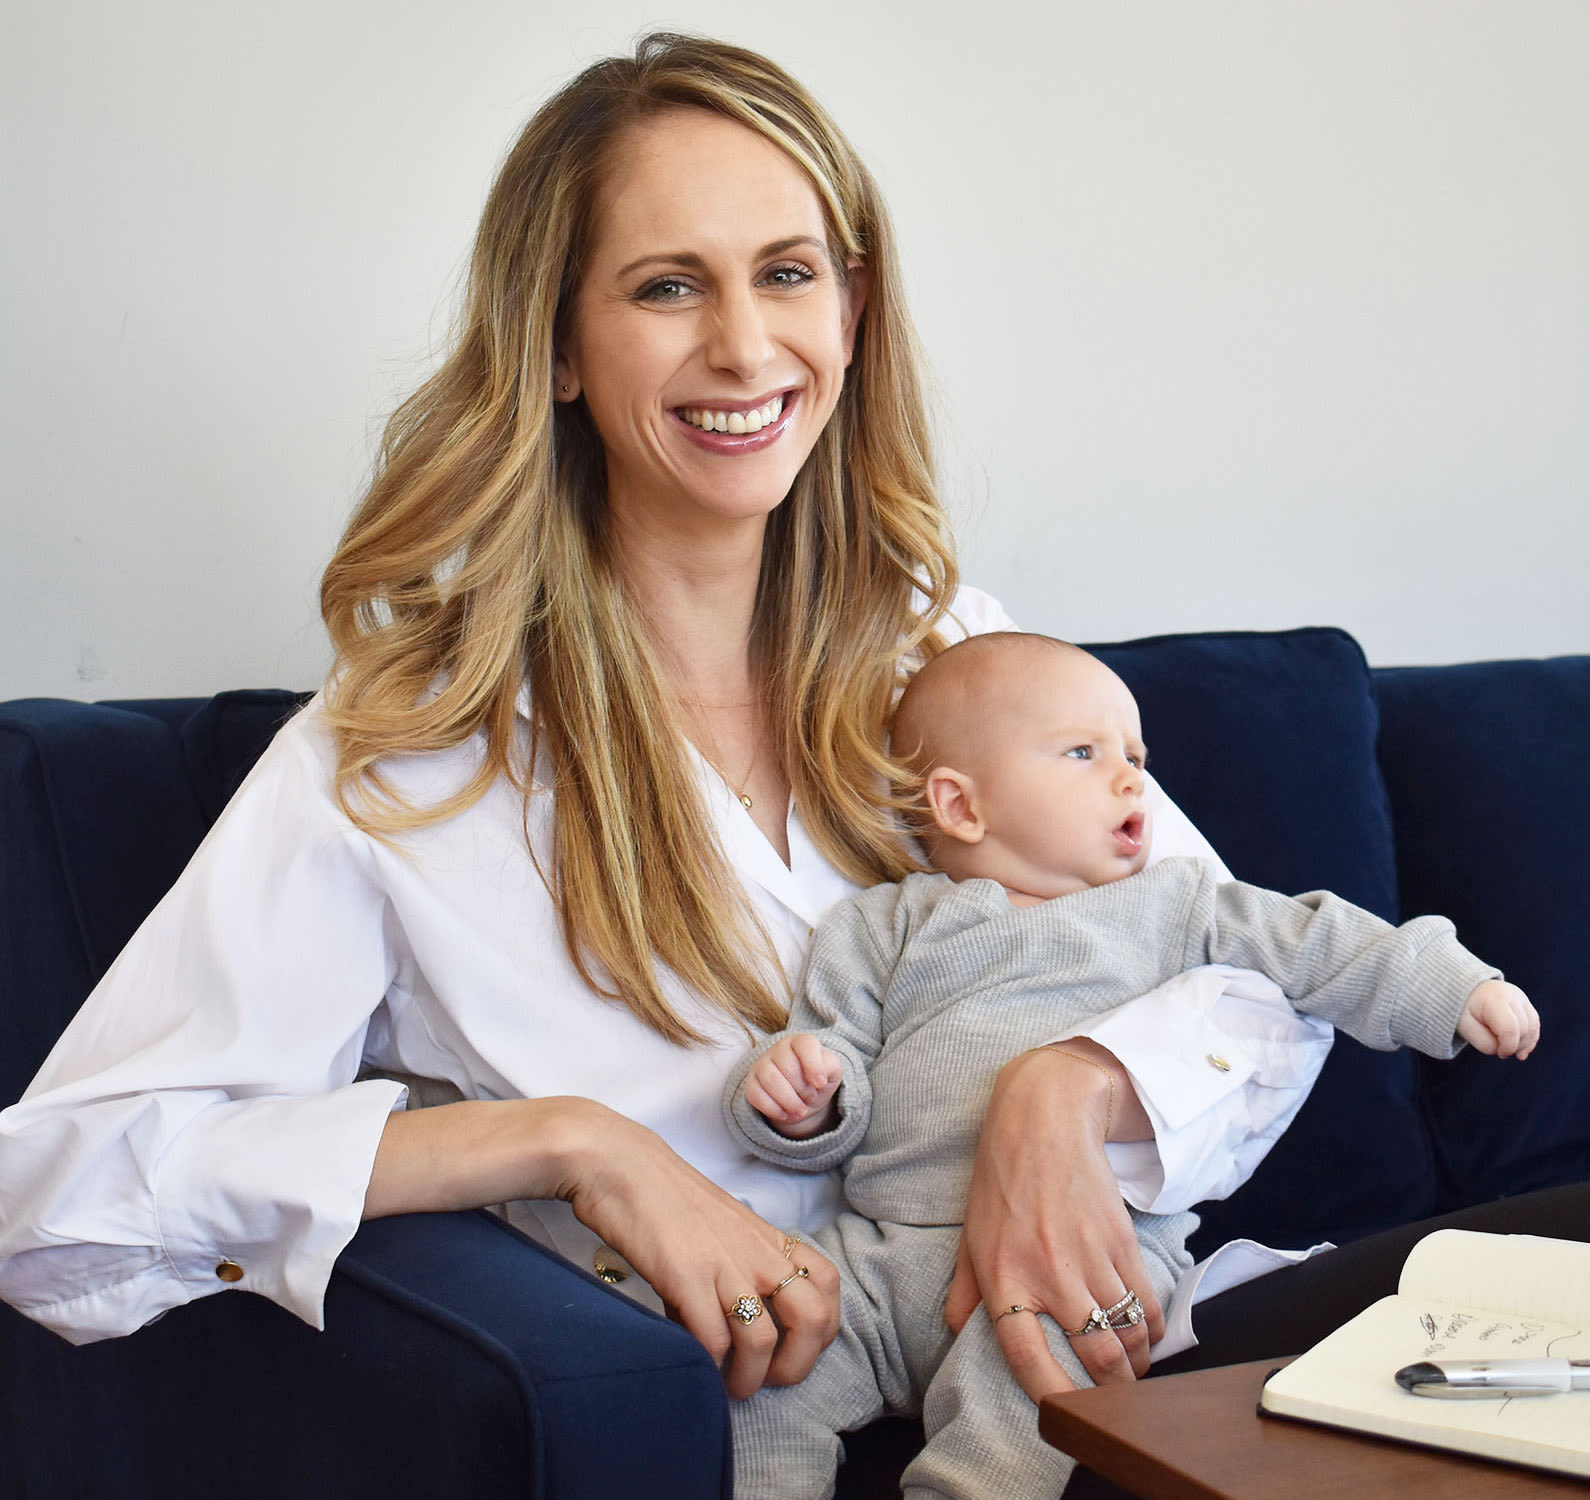 Veracity founder, Allie Egan, smiling with her newborn son in her lap.